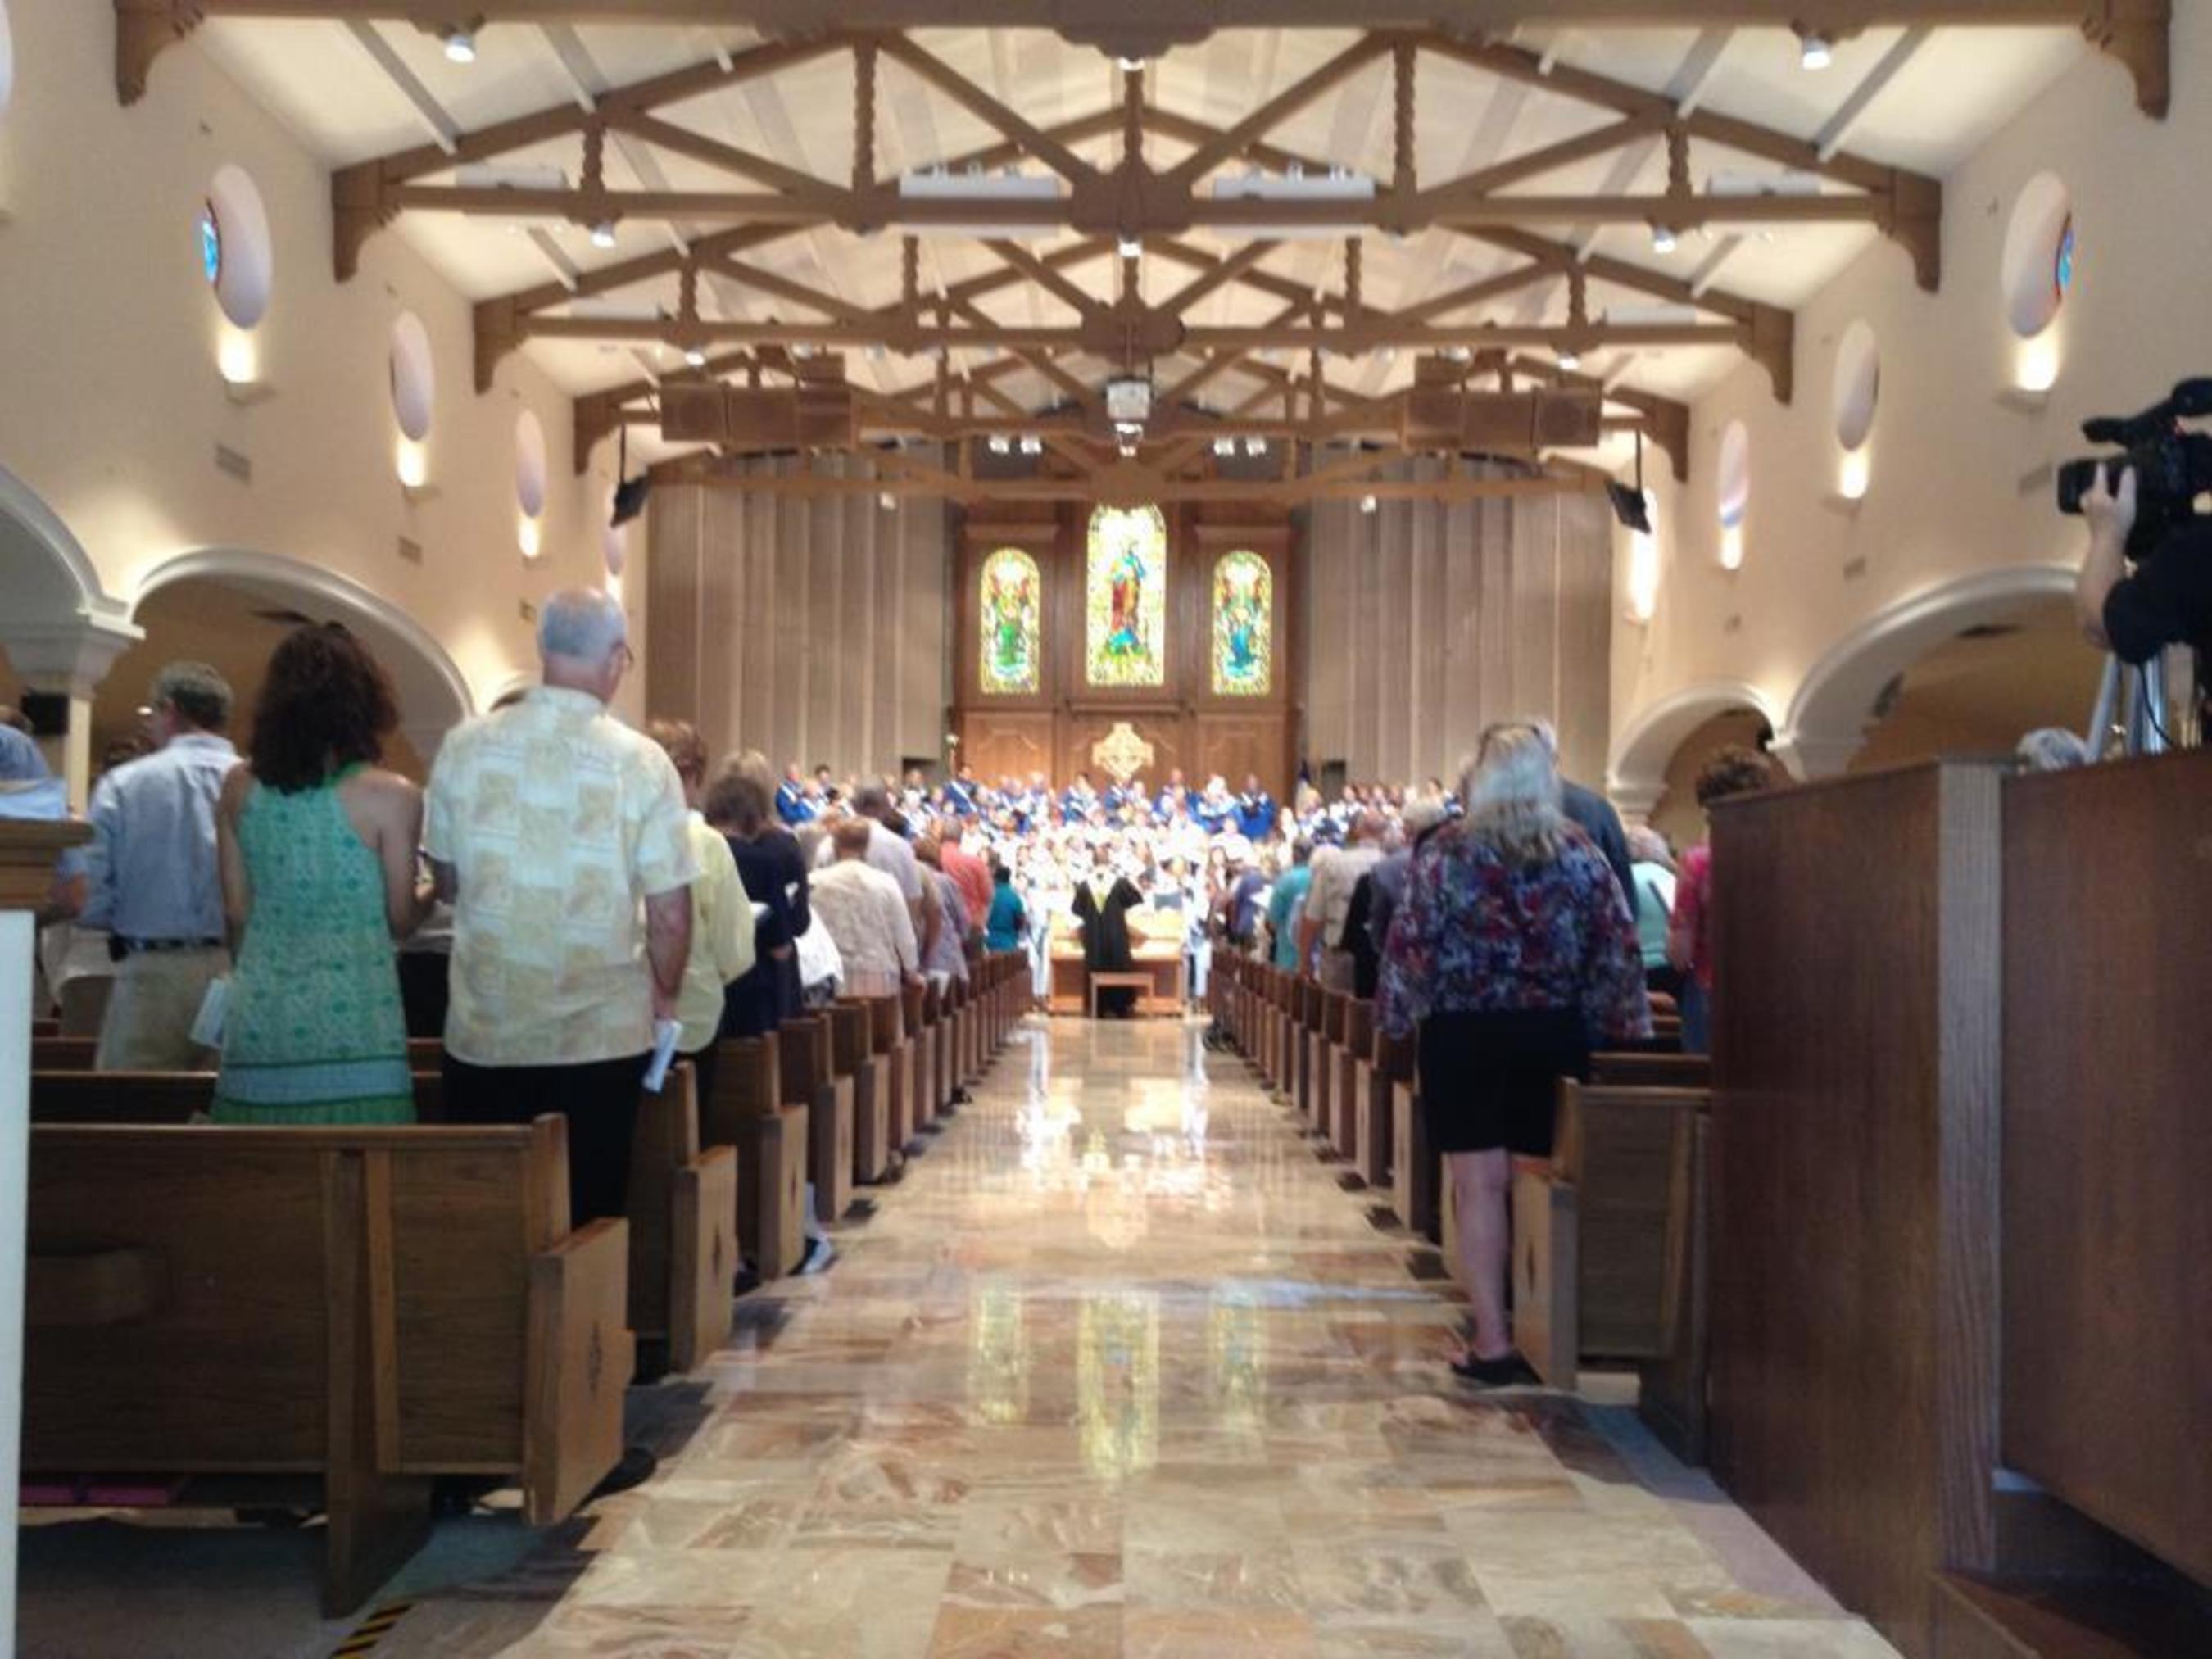 First Presbyterian Church of Fort Lauderdale offers both traditional and contemporary worship services on Sunday mornings. (PRNewsFoto/First Presbyterian Church...)